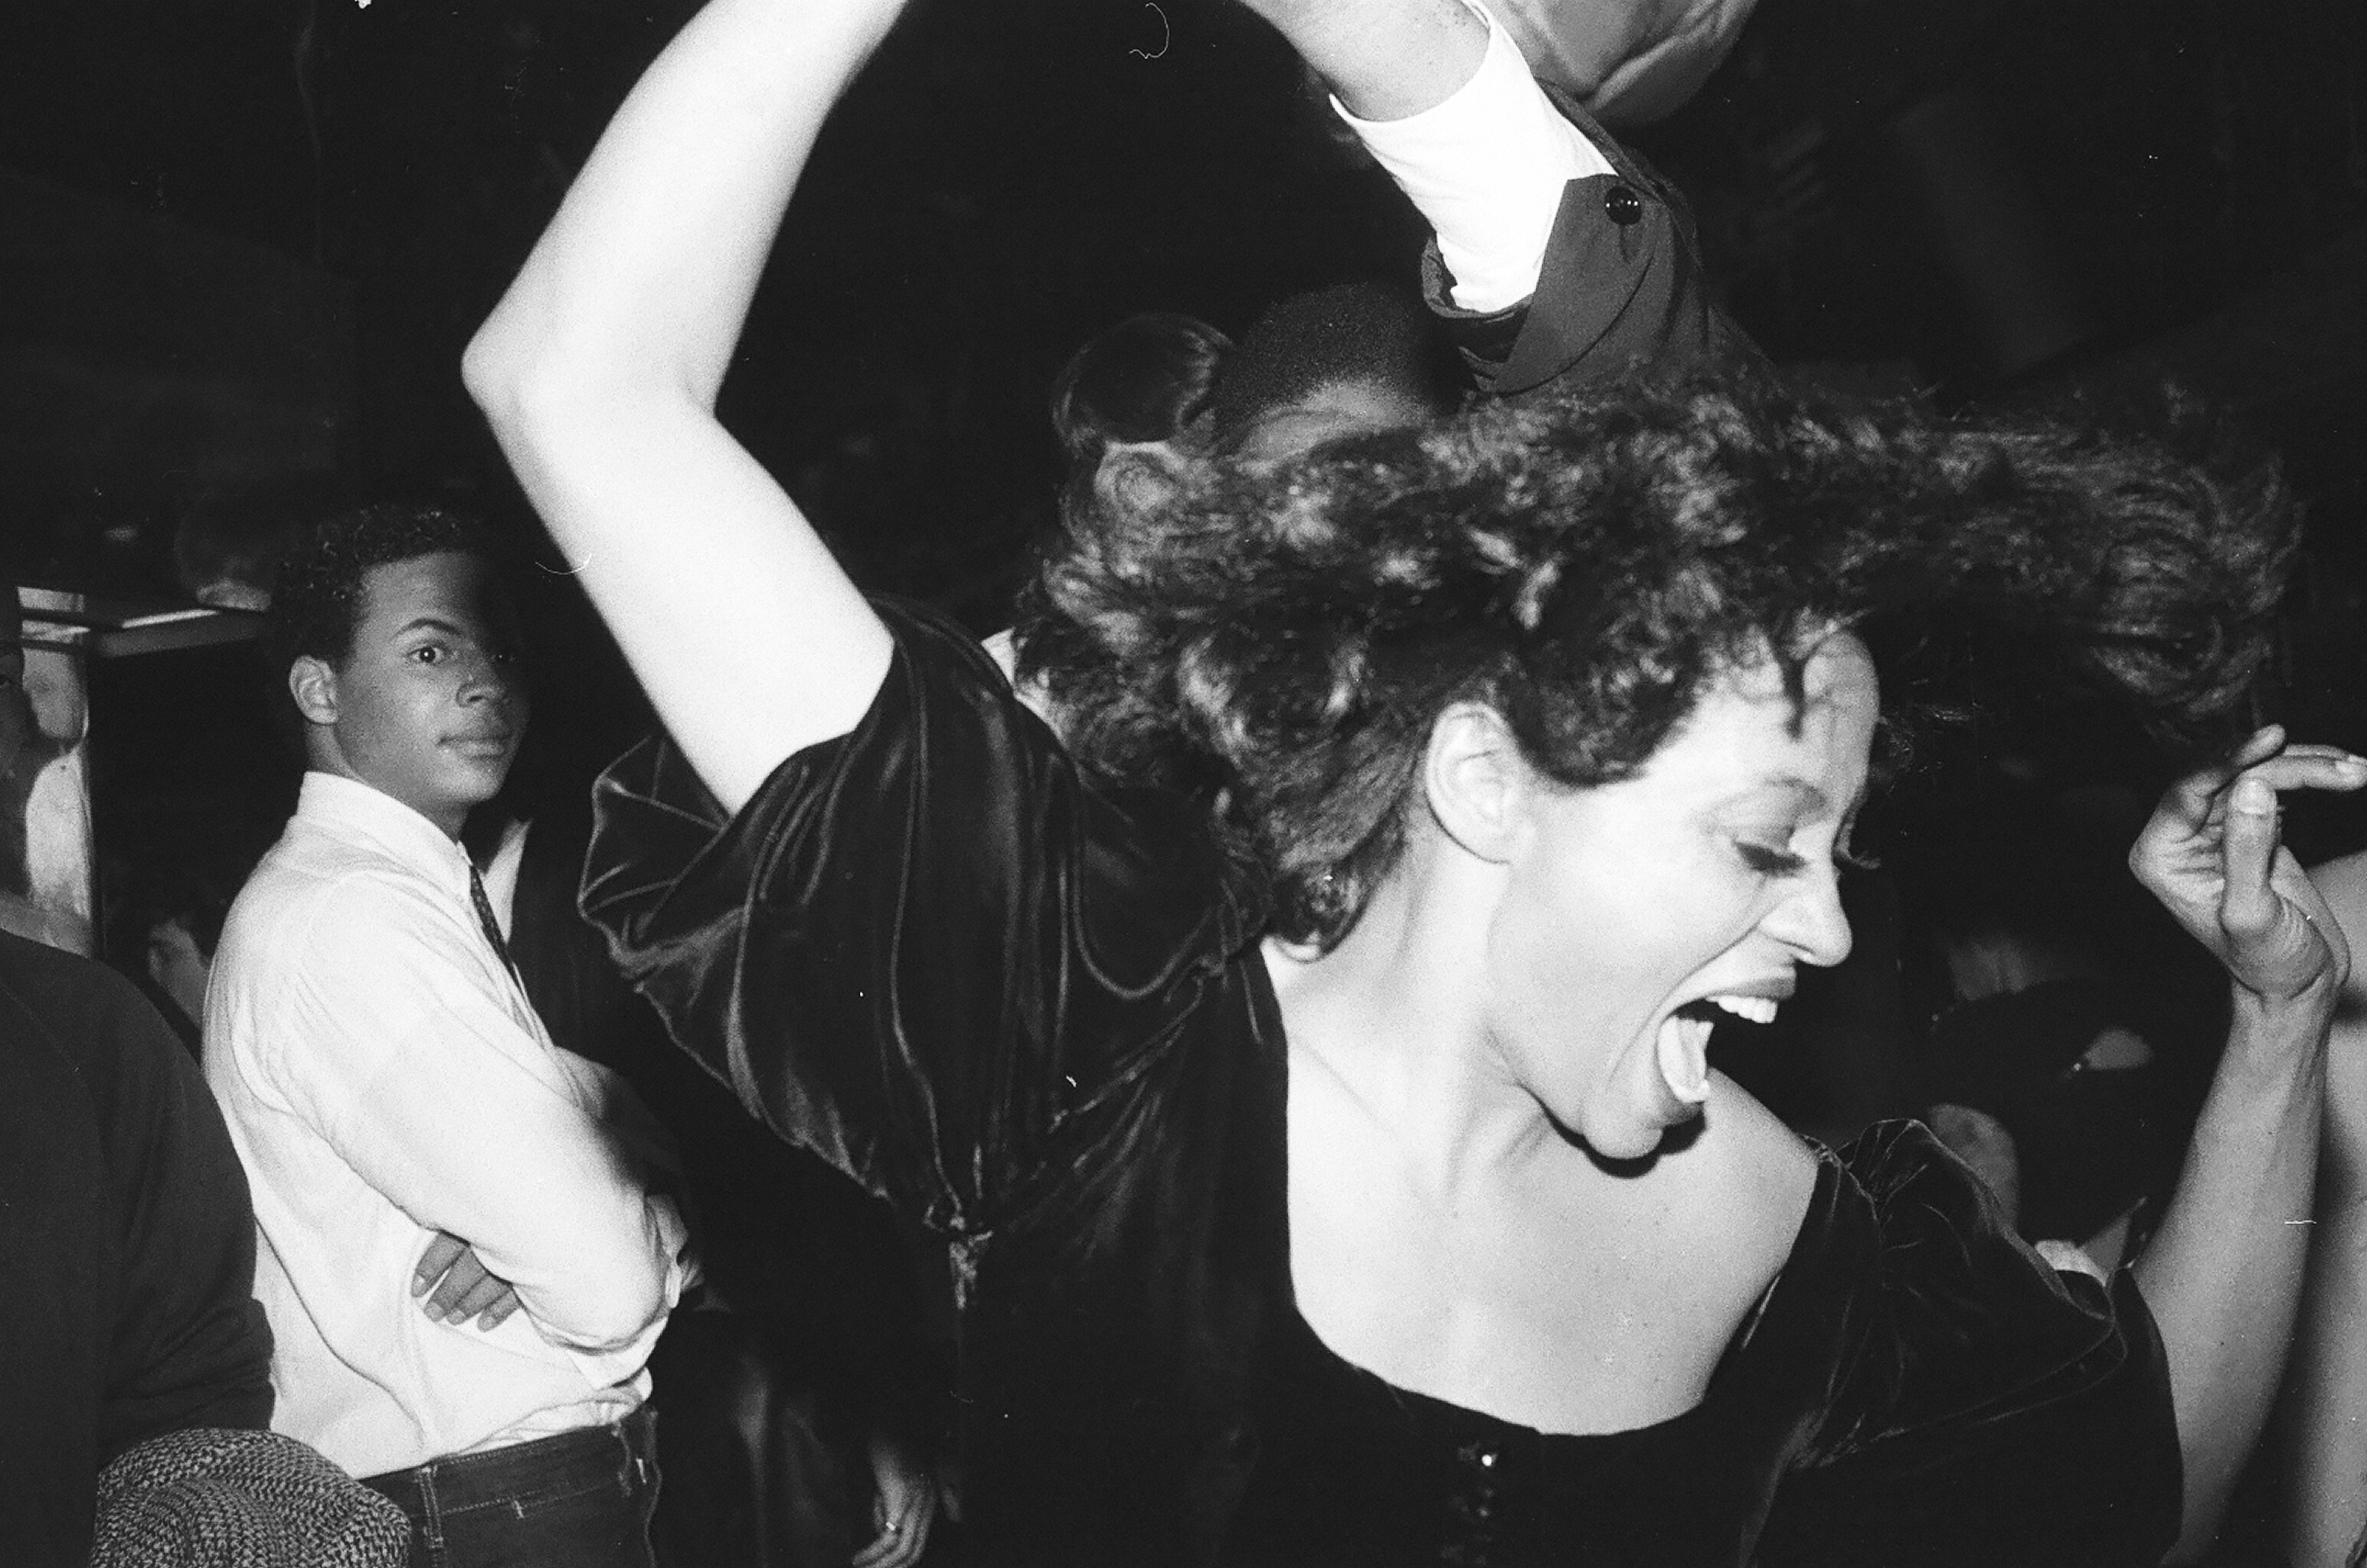 Diana Ross wearing a black top and lipstick at Studio 54.